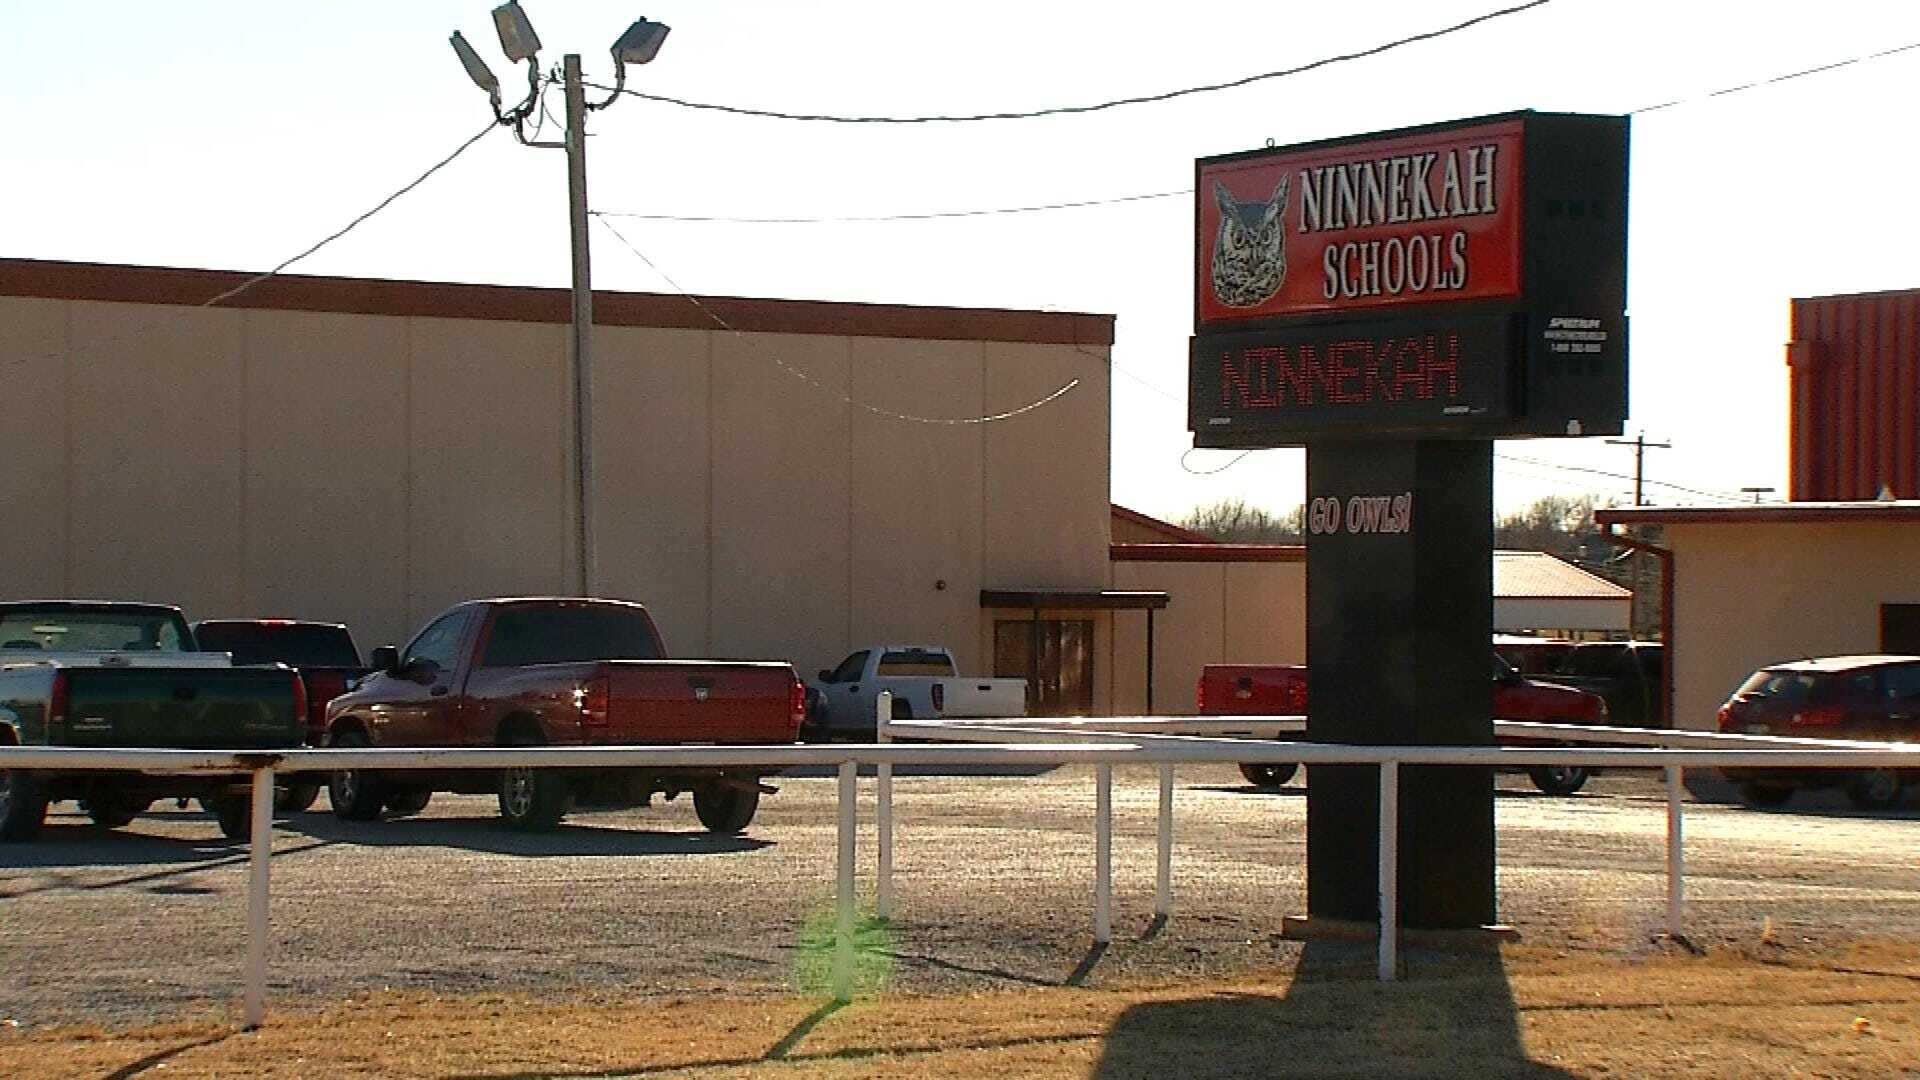 Ninnekah To Have Virtual Learning Day Dec. 5 After Threat Made To The School